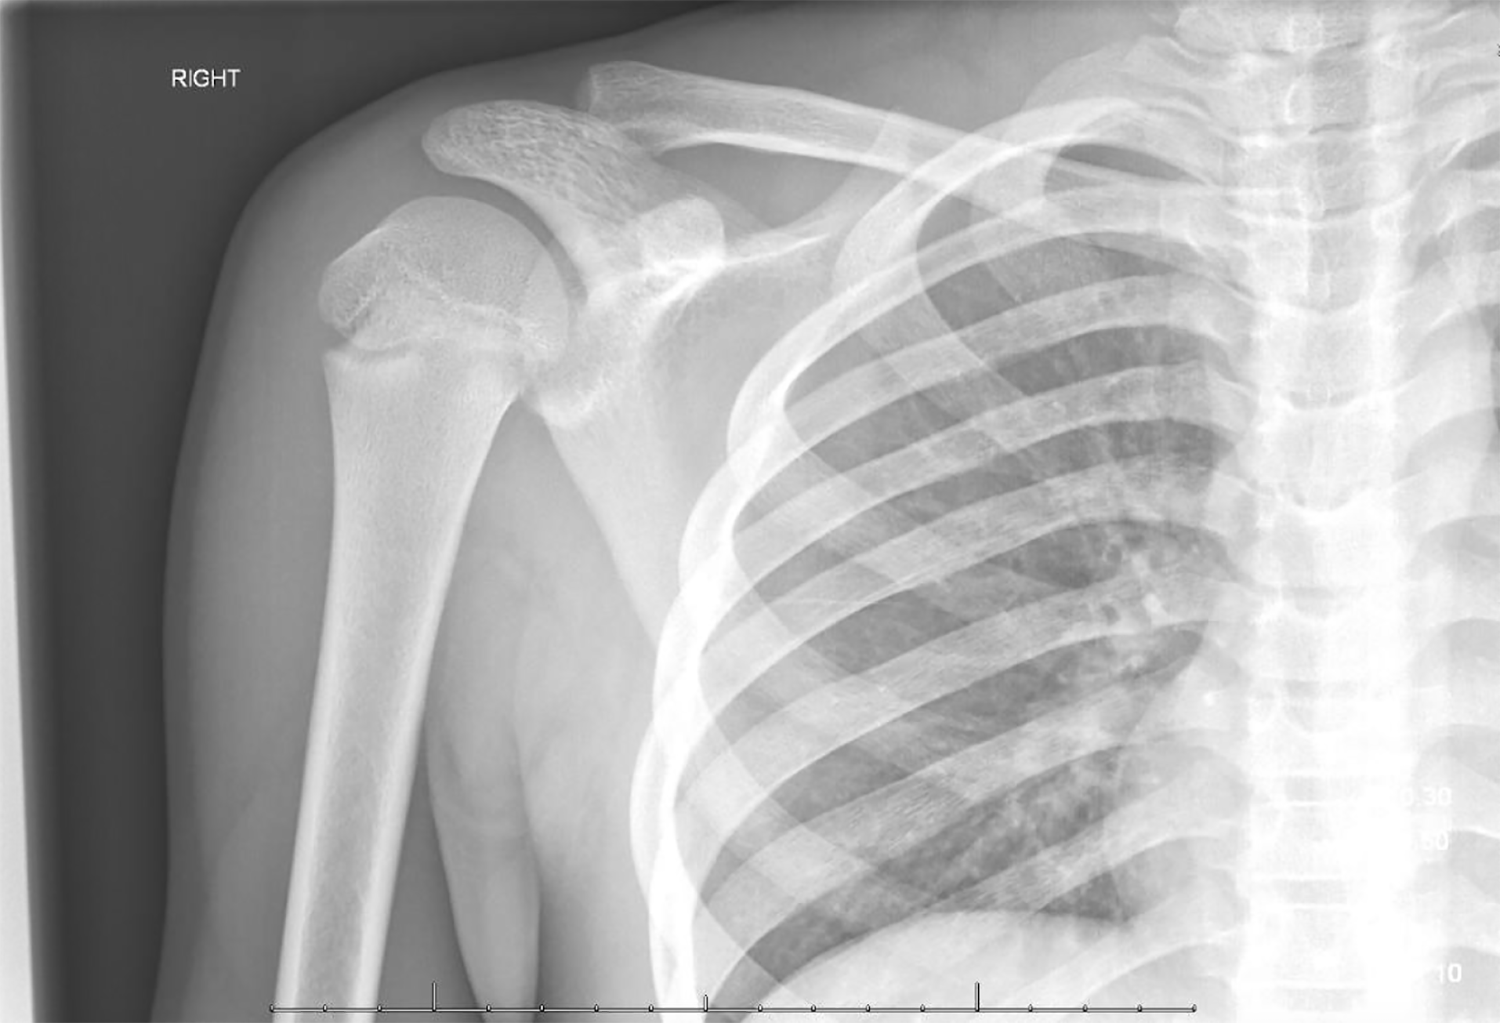 Sternoclavicular Joint Subluxation